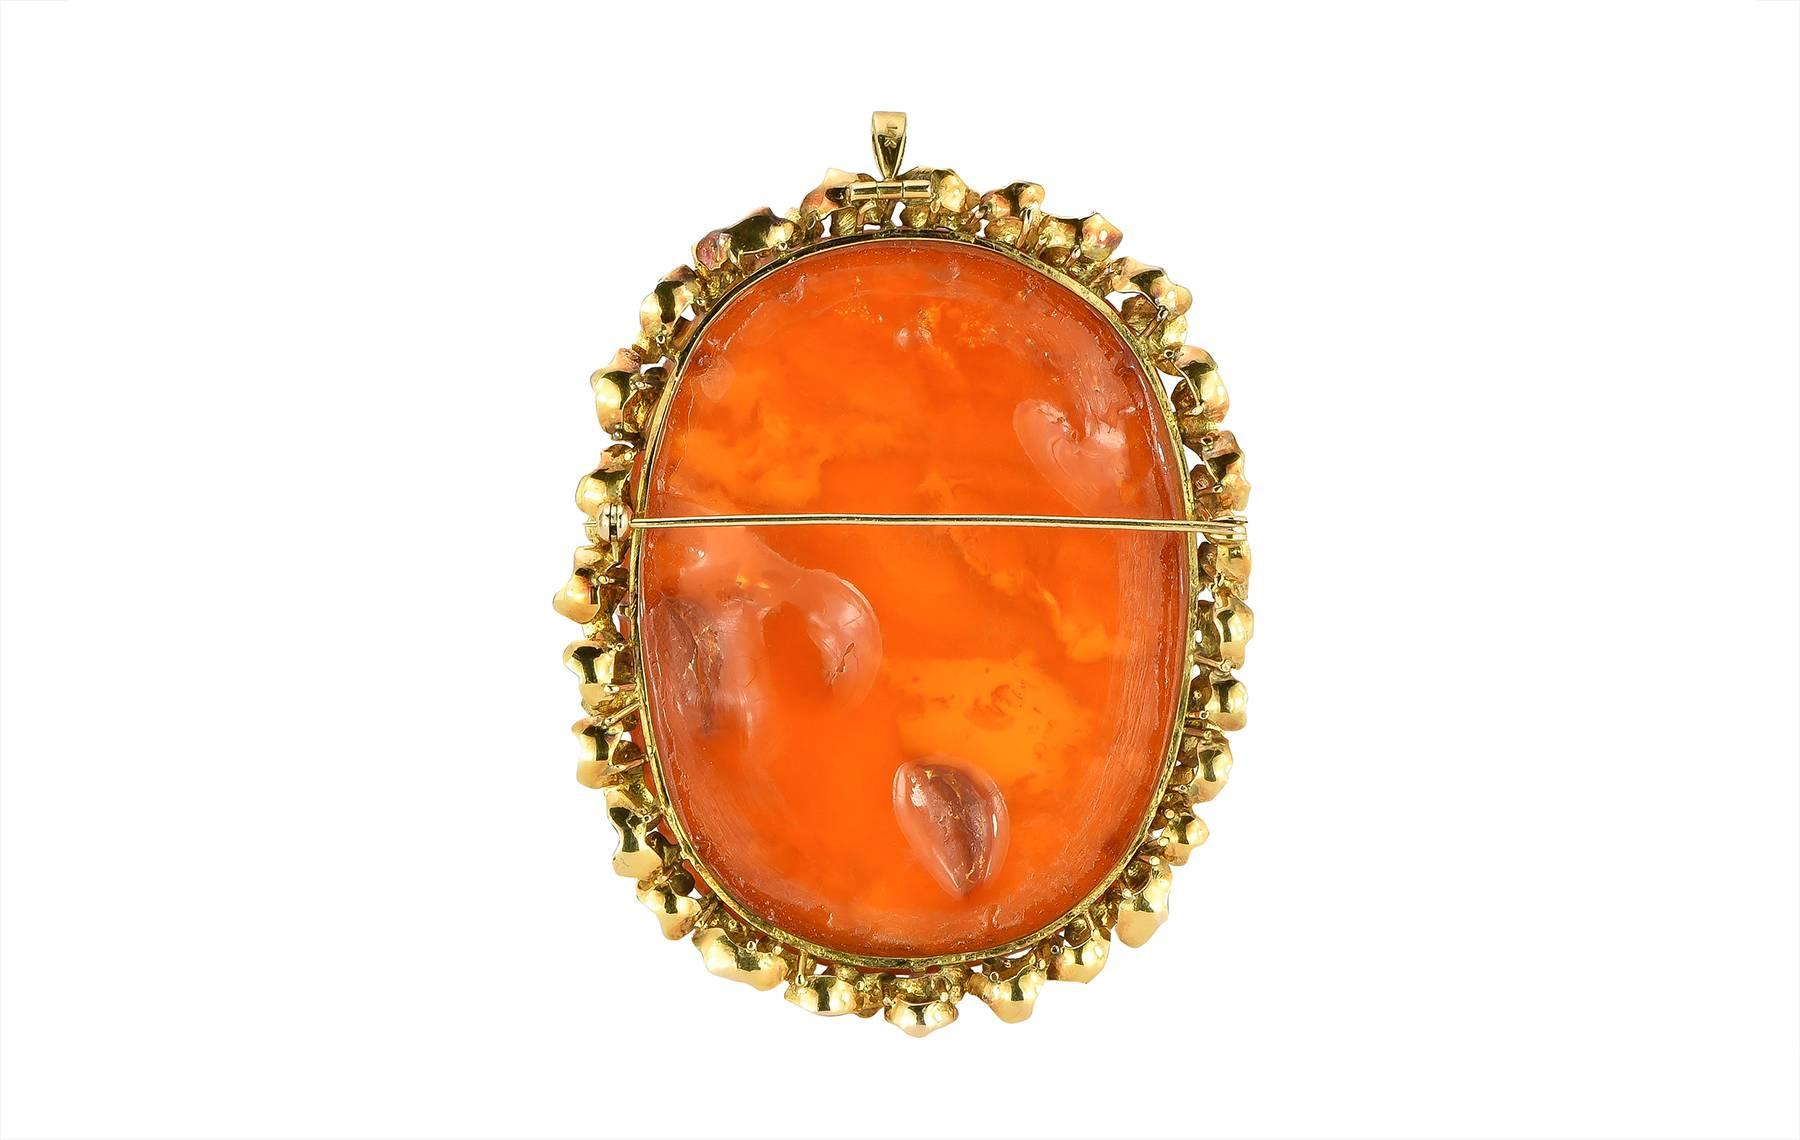 A large carved amber and 14k yellow gold pendant and brooch.  The carving depicts two peacocks with a floral background.  The amber is set with a textured double row frame in a foliate design.

Size:  3.55 in. x x 2.75 in.
Hallmark:  14K